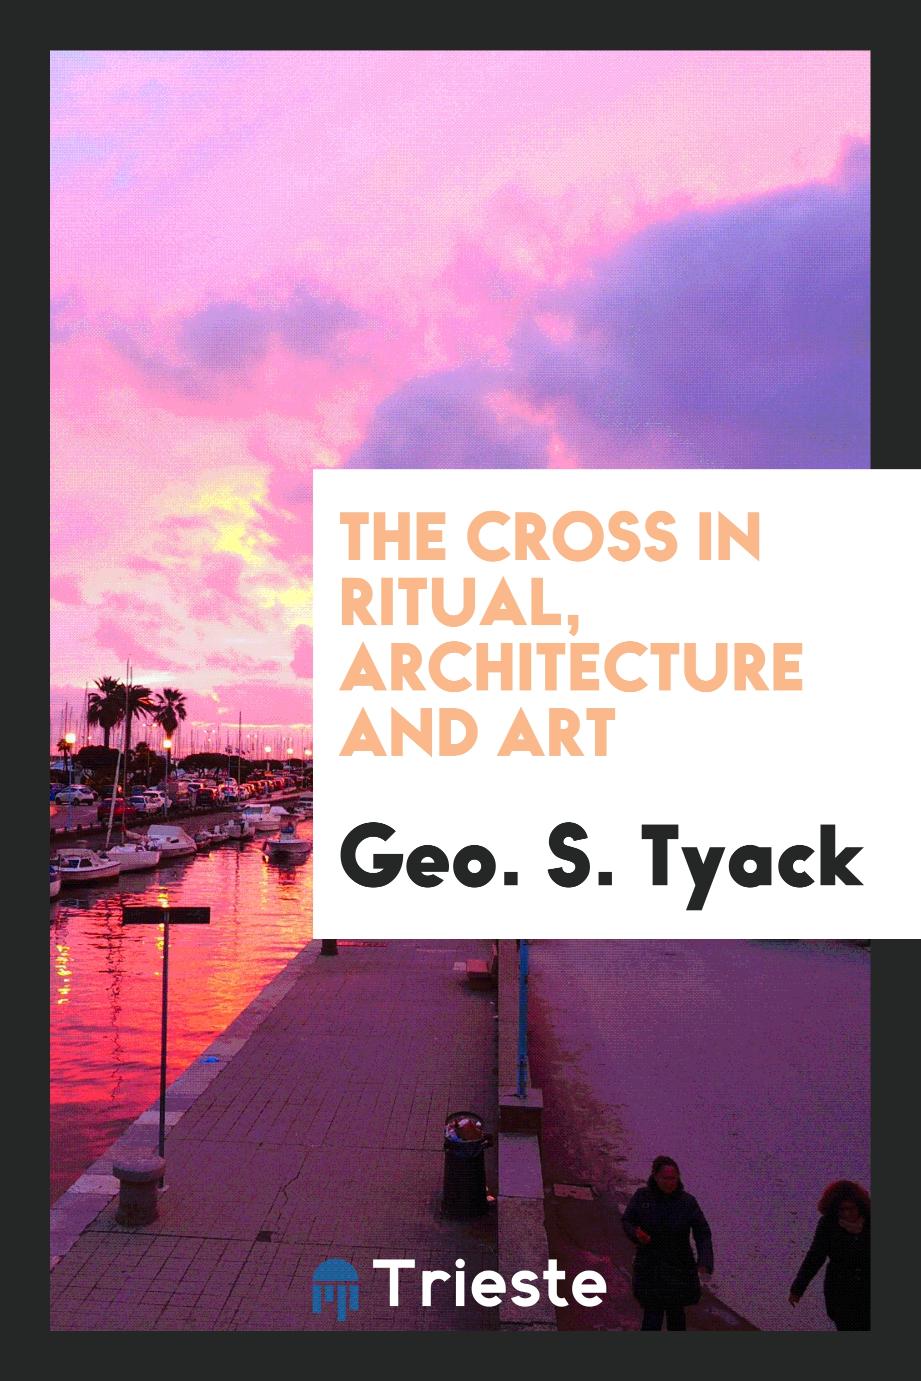 The cross in ritual, architecture and art